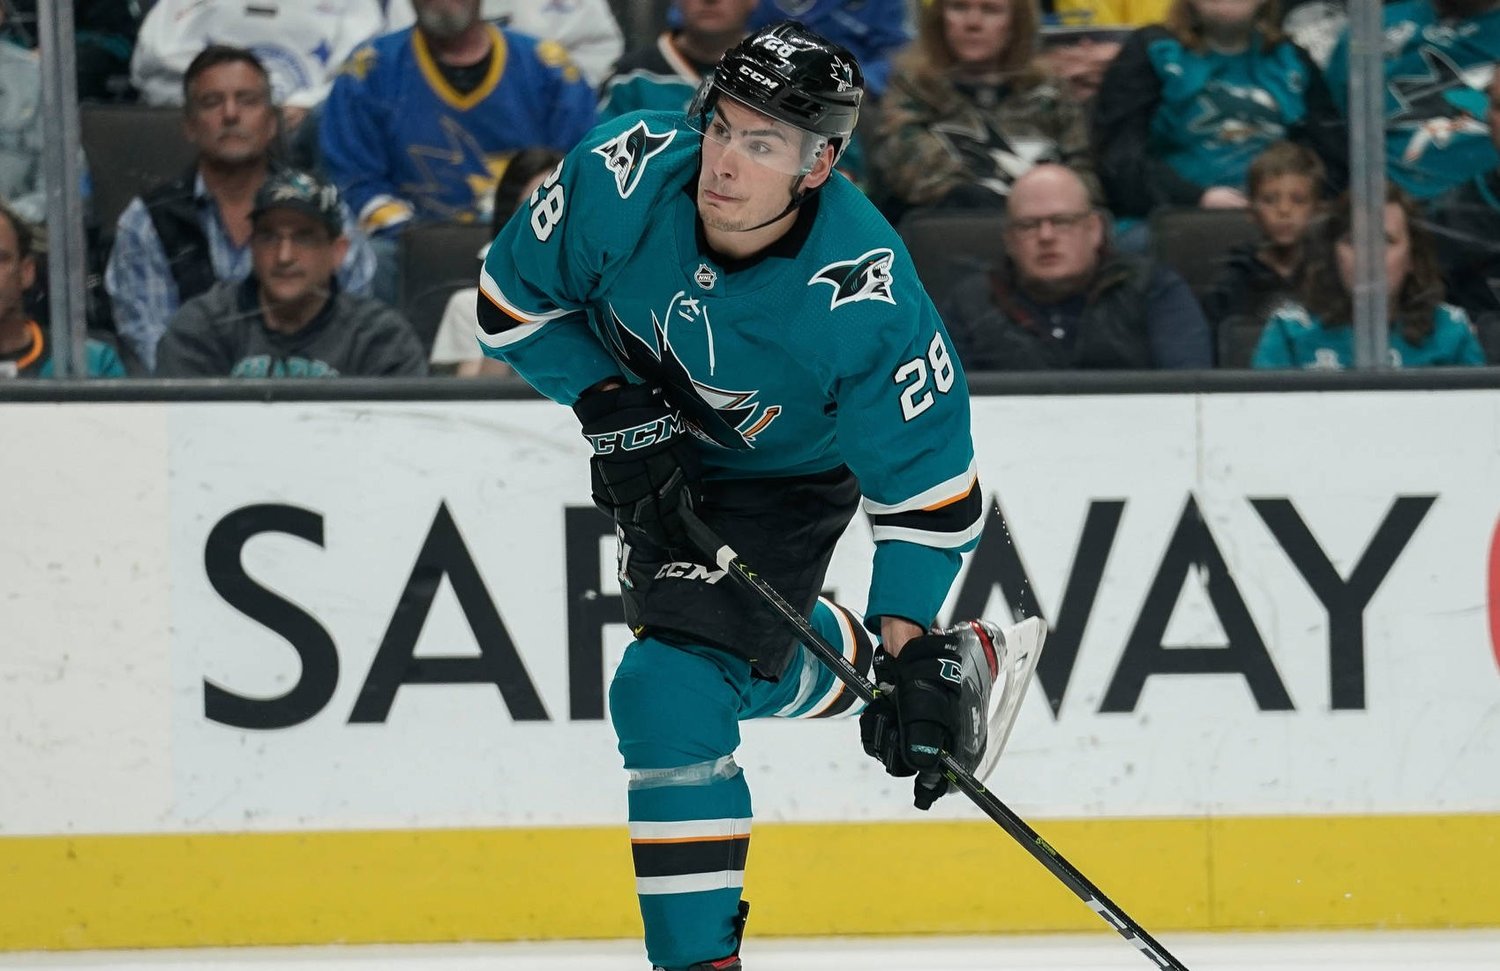 NHL - IT'S TIMO TIME IN NEW JERSEY! 😈 The New Jersey Devils acquire star  forward Timo Meier from the San Jose Sharks in exchange for a large package  highlighted by Fabian